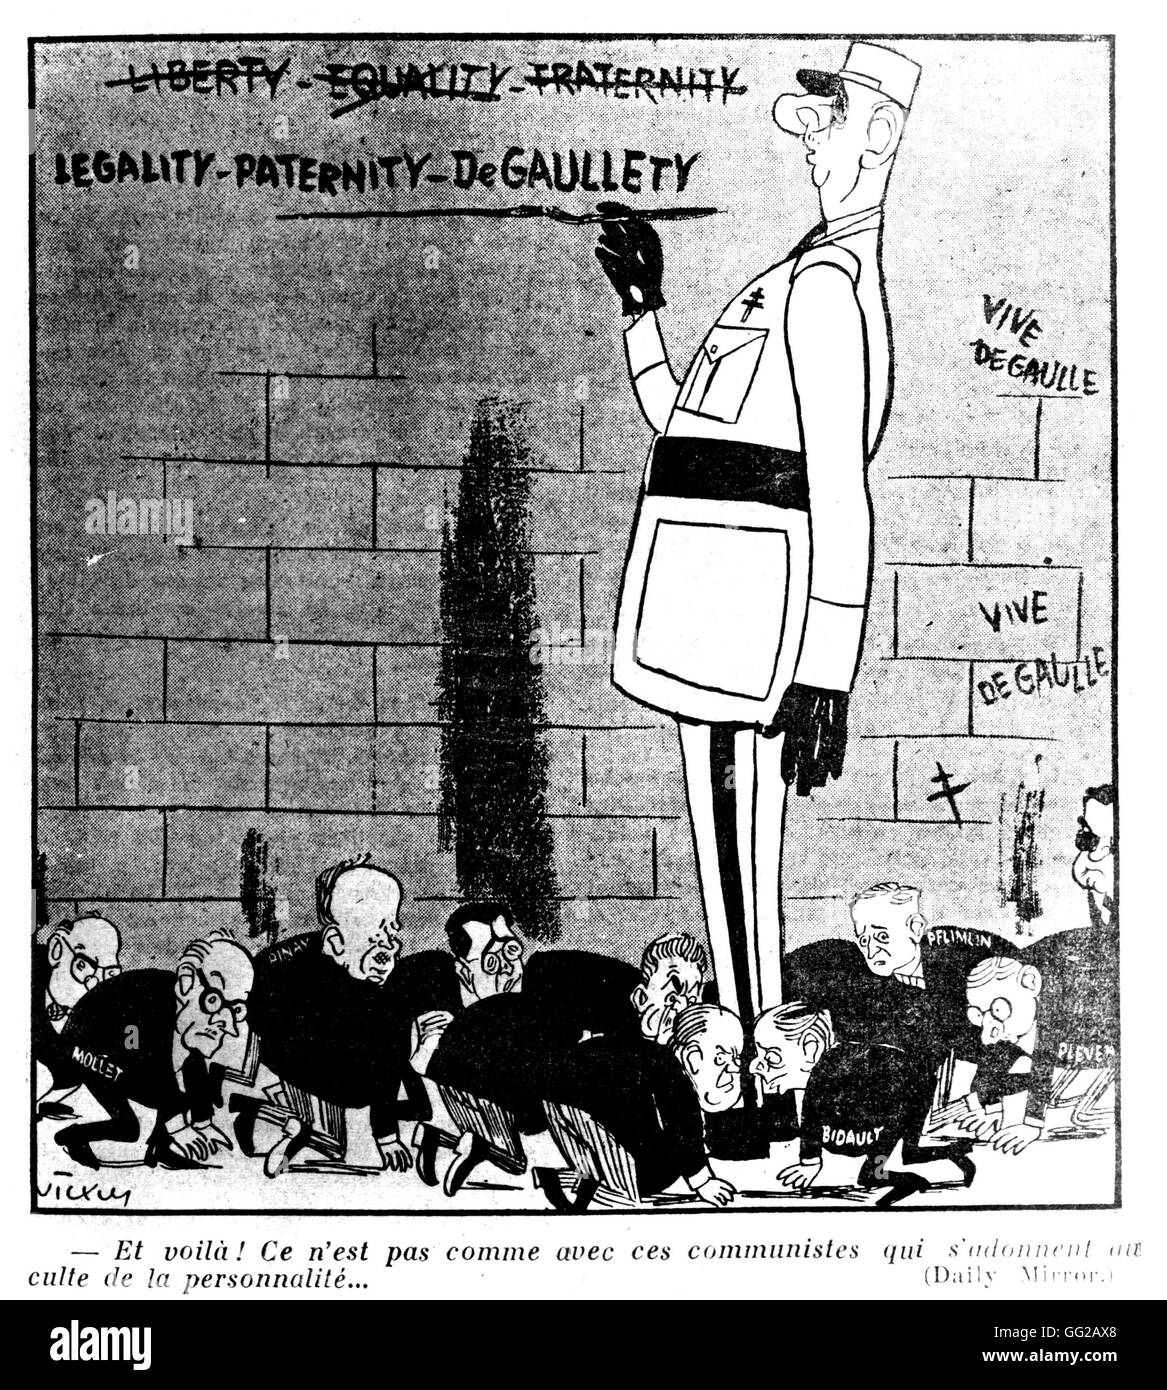 Caricature by Vicky published in F.O. and : 'That's it! WE are not like those Communists who worship individuals' June 4, 1958 France Paris, Bibliothèque Nationale Stock Photo